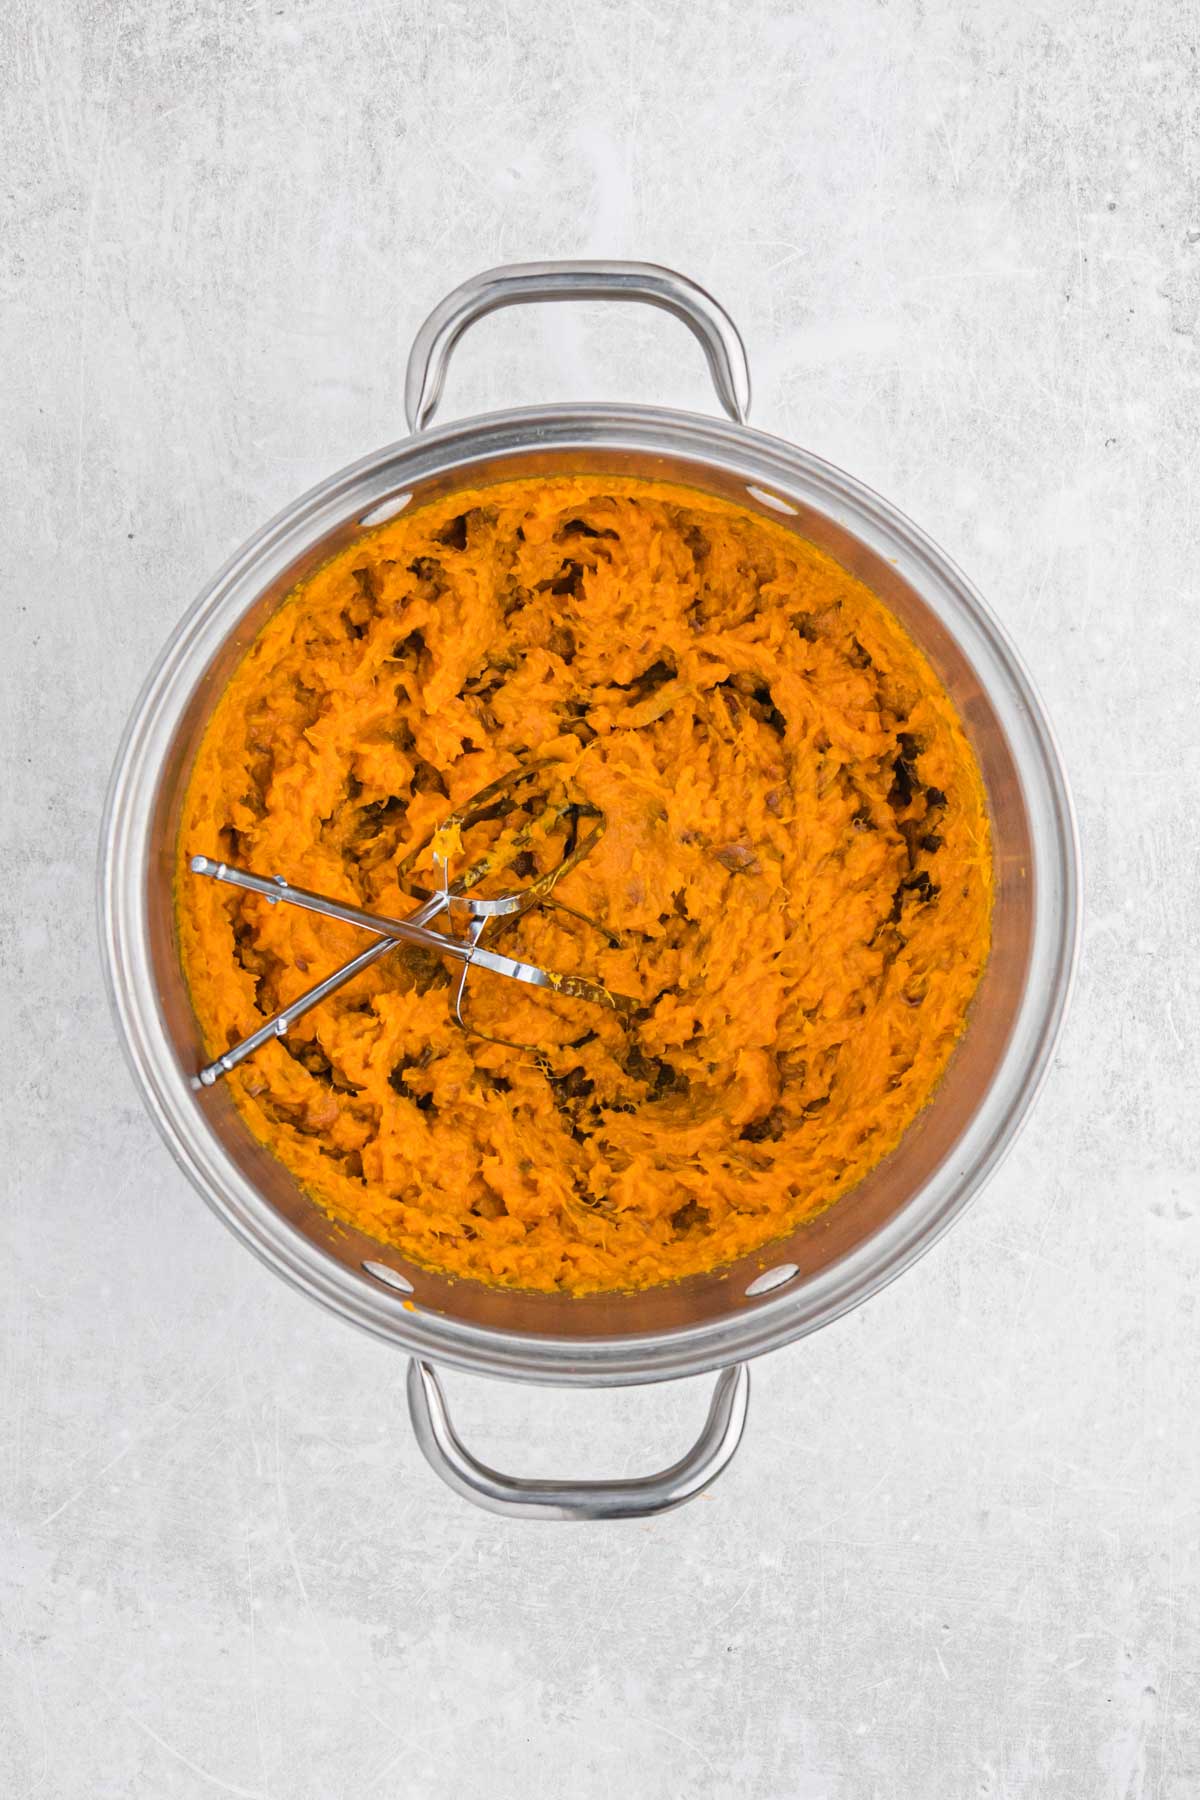 Mashed sweet potatoes in a pot.